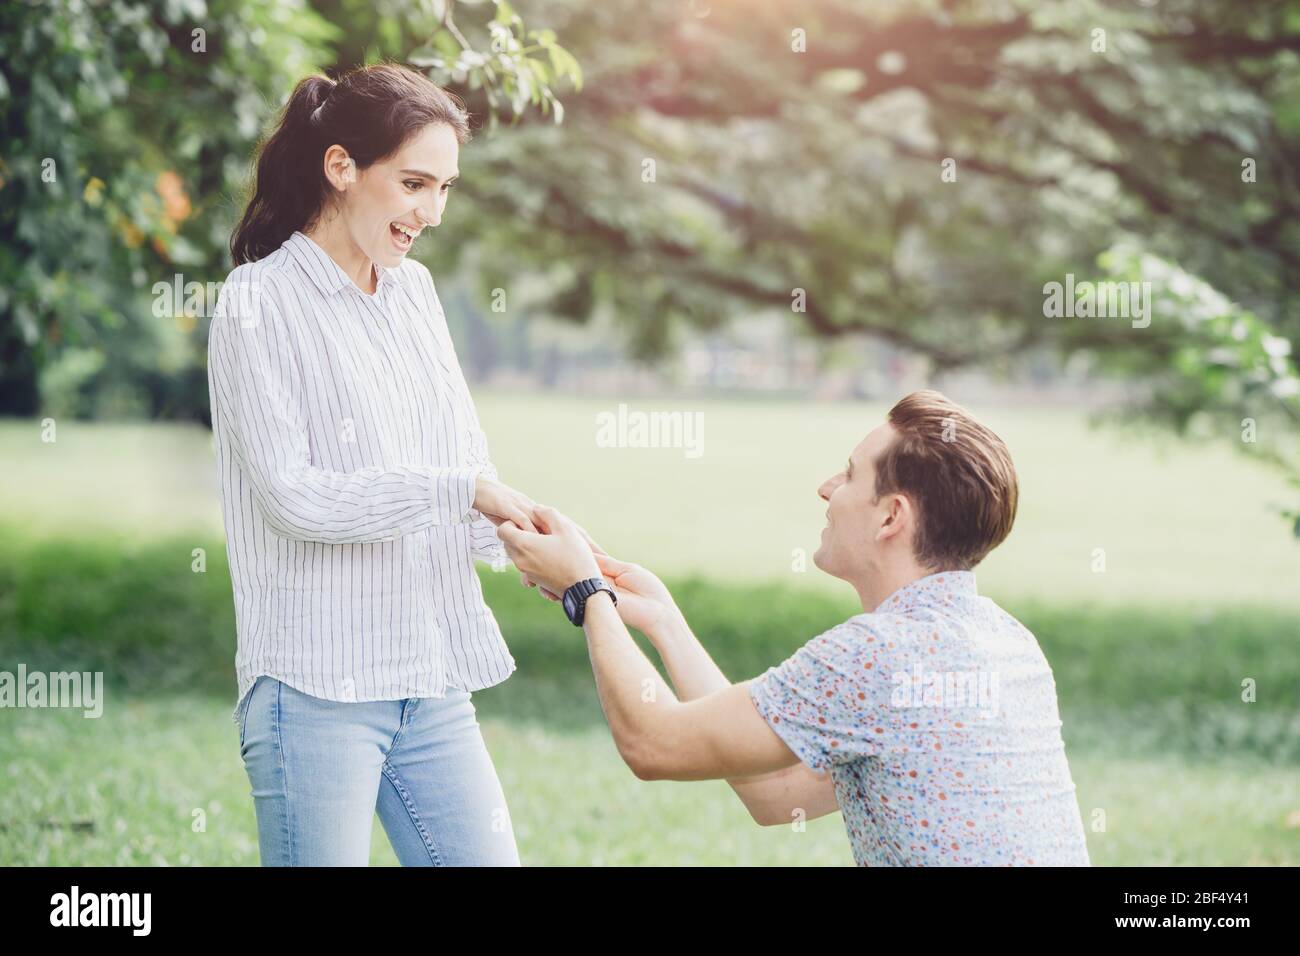 Photos of engagements, marriage proposals, and newly engaged couples lover young man and lady outdoor green park. Stock Photo